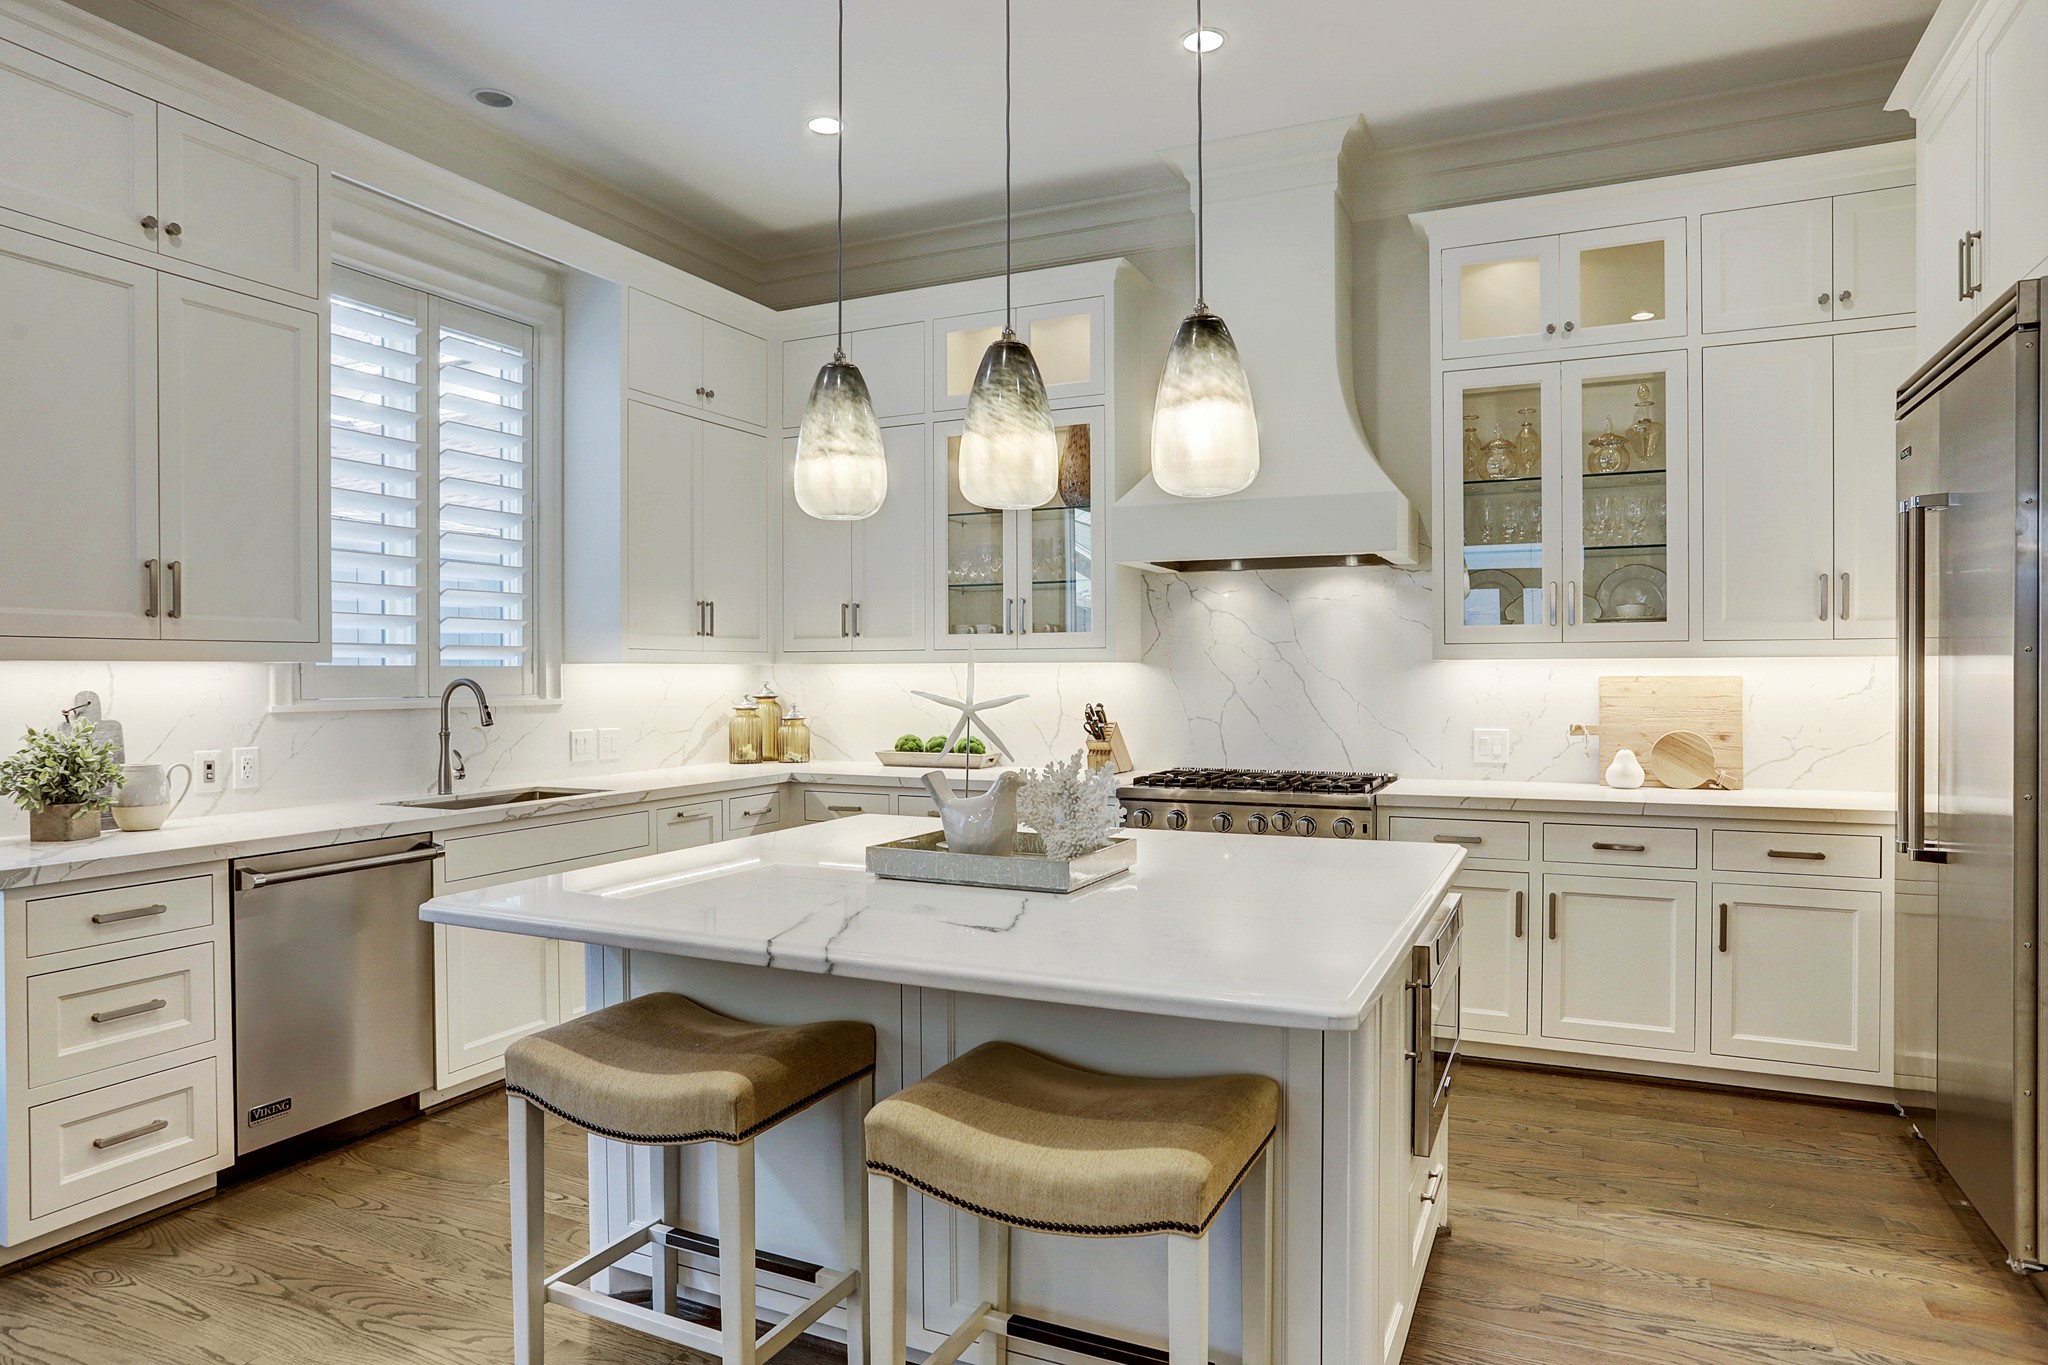 The gourmet kitchen has a marble island with knee space for additional seating and storage below; Viking appliances; glass front cabinets; upgrades include new quartz counter tops for the remaining counters, new stainless sink with Insinkerator disposal and new designer pendant lighting.